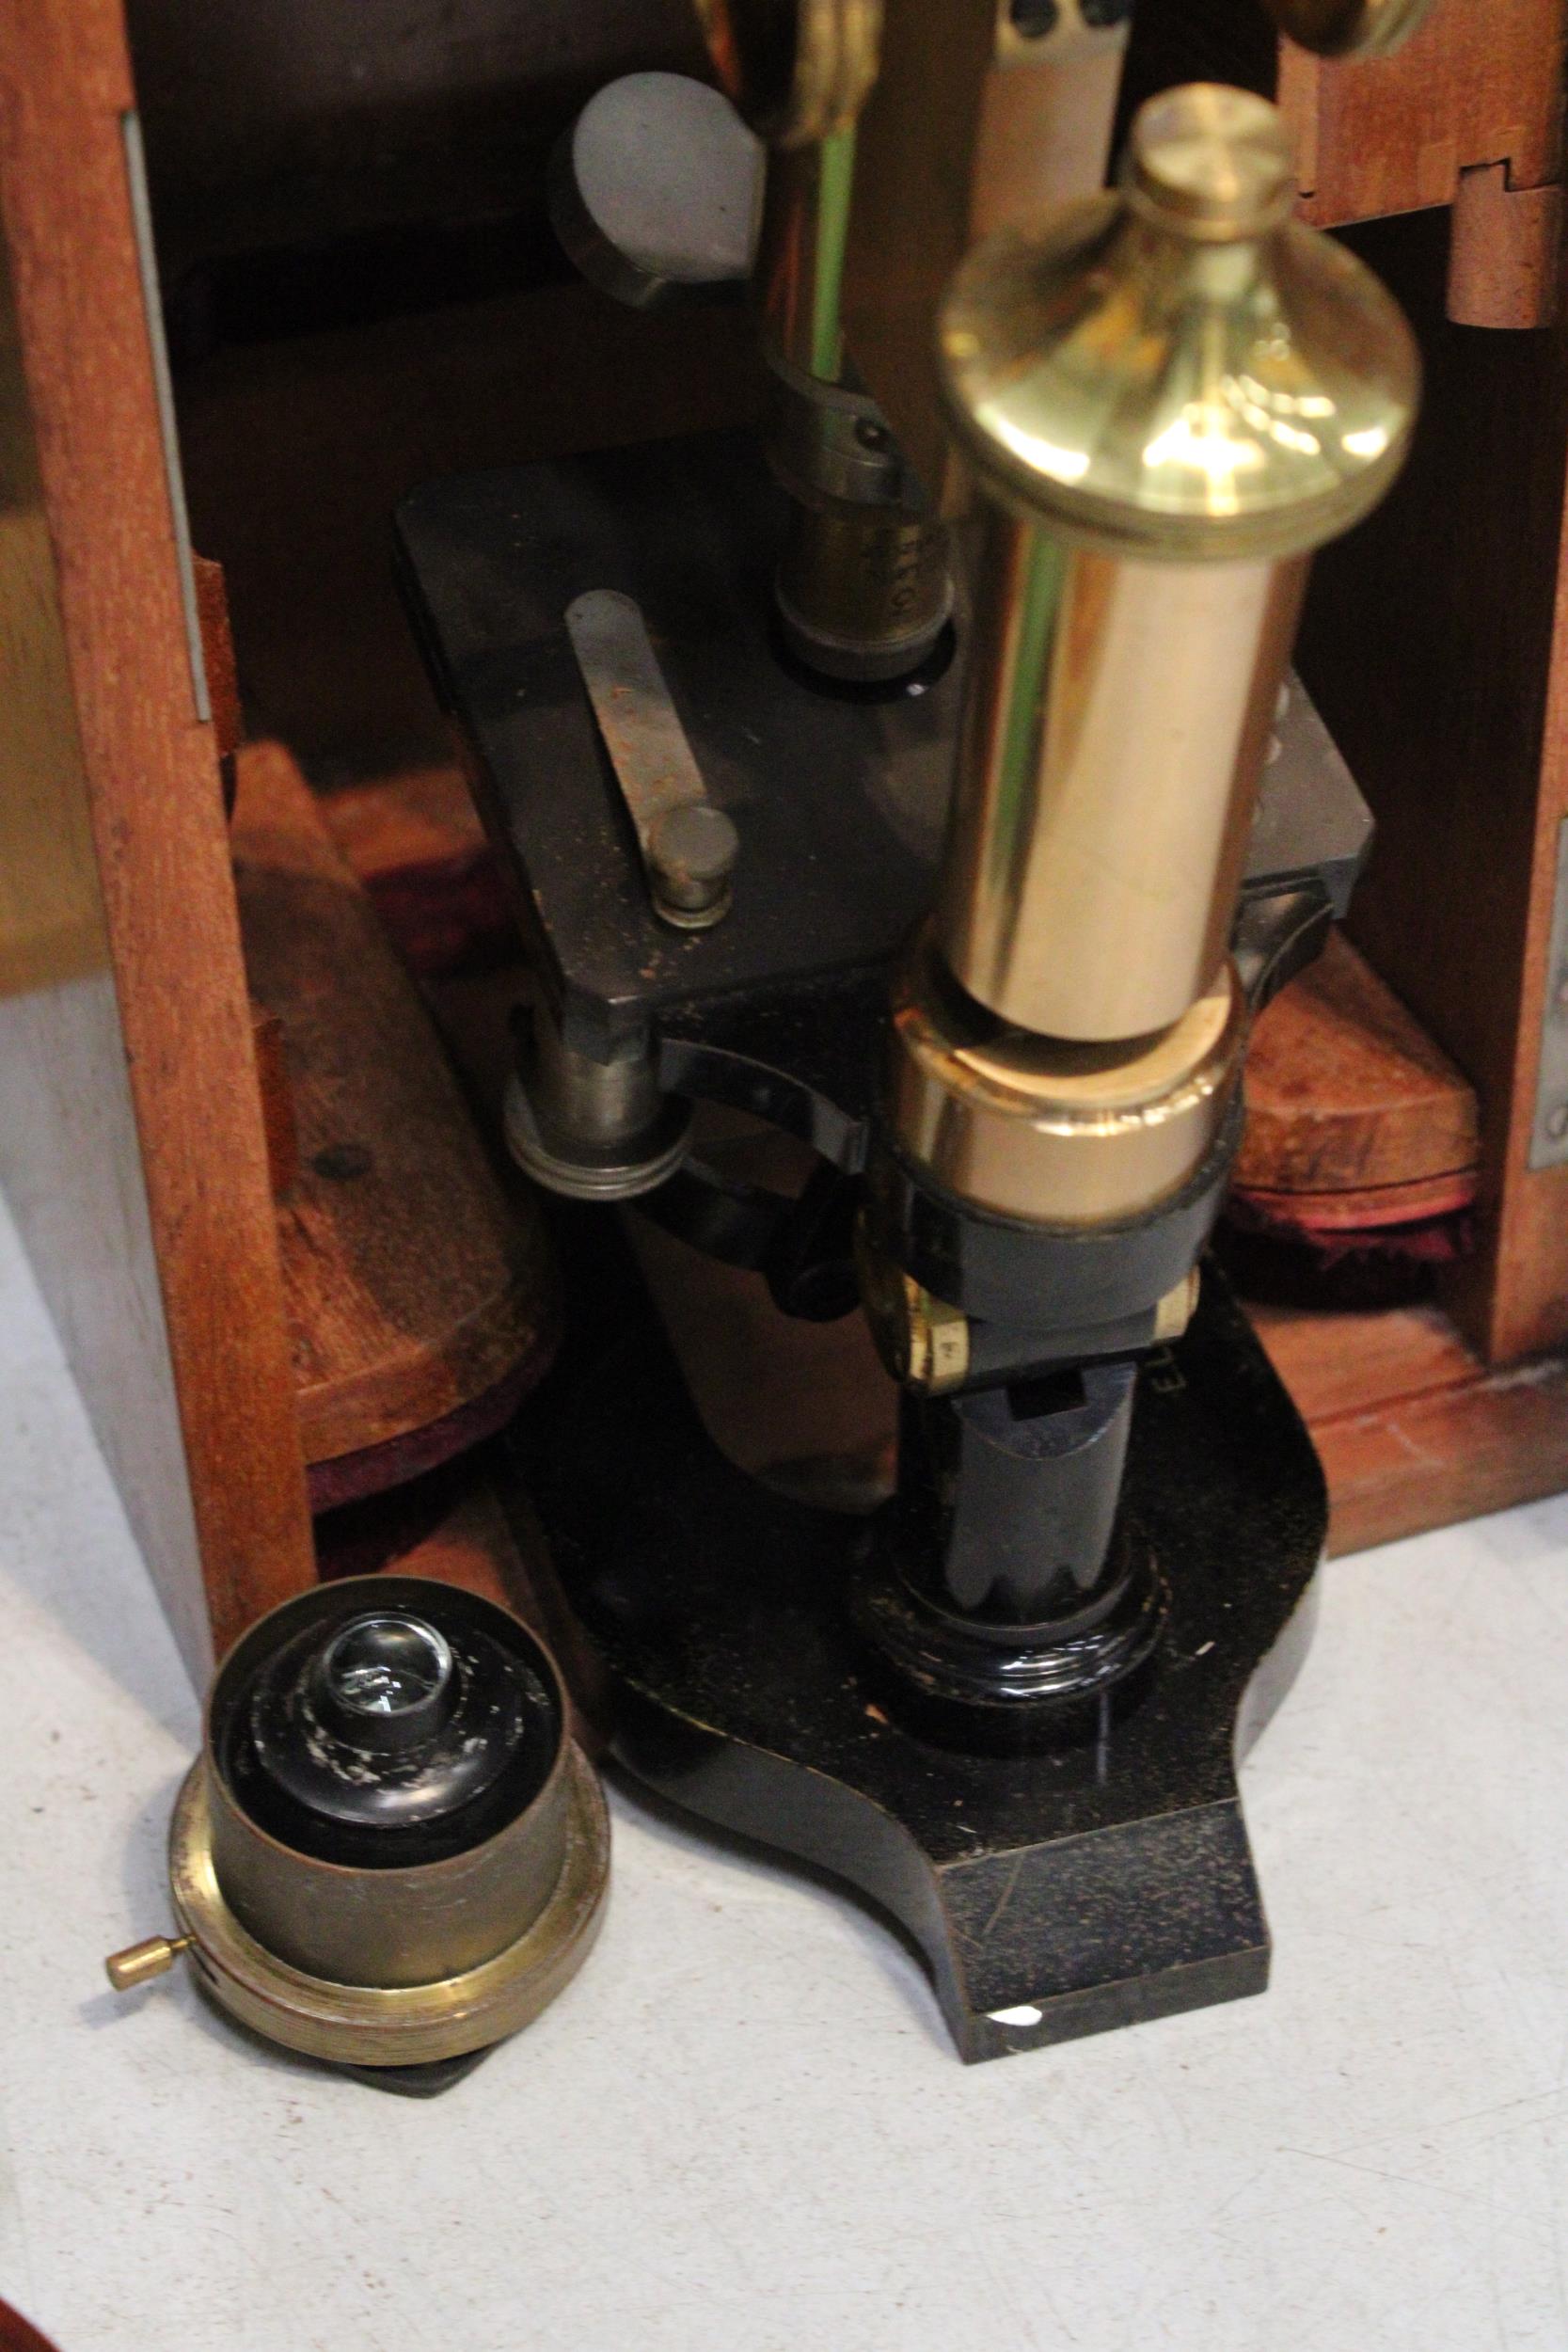 AN ANTIQUE E. LEITZ WETZIAR OPTICAL SCIENCE INSTRUMENT MICROSCOPE NO. 76905 IN A MAHOGANY CASED - Image 5 of 10